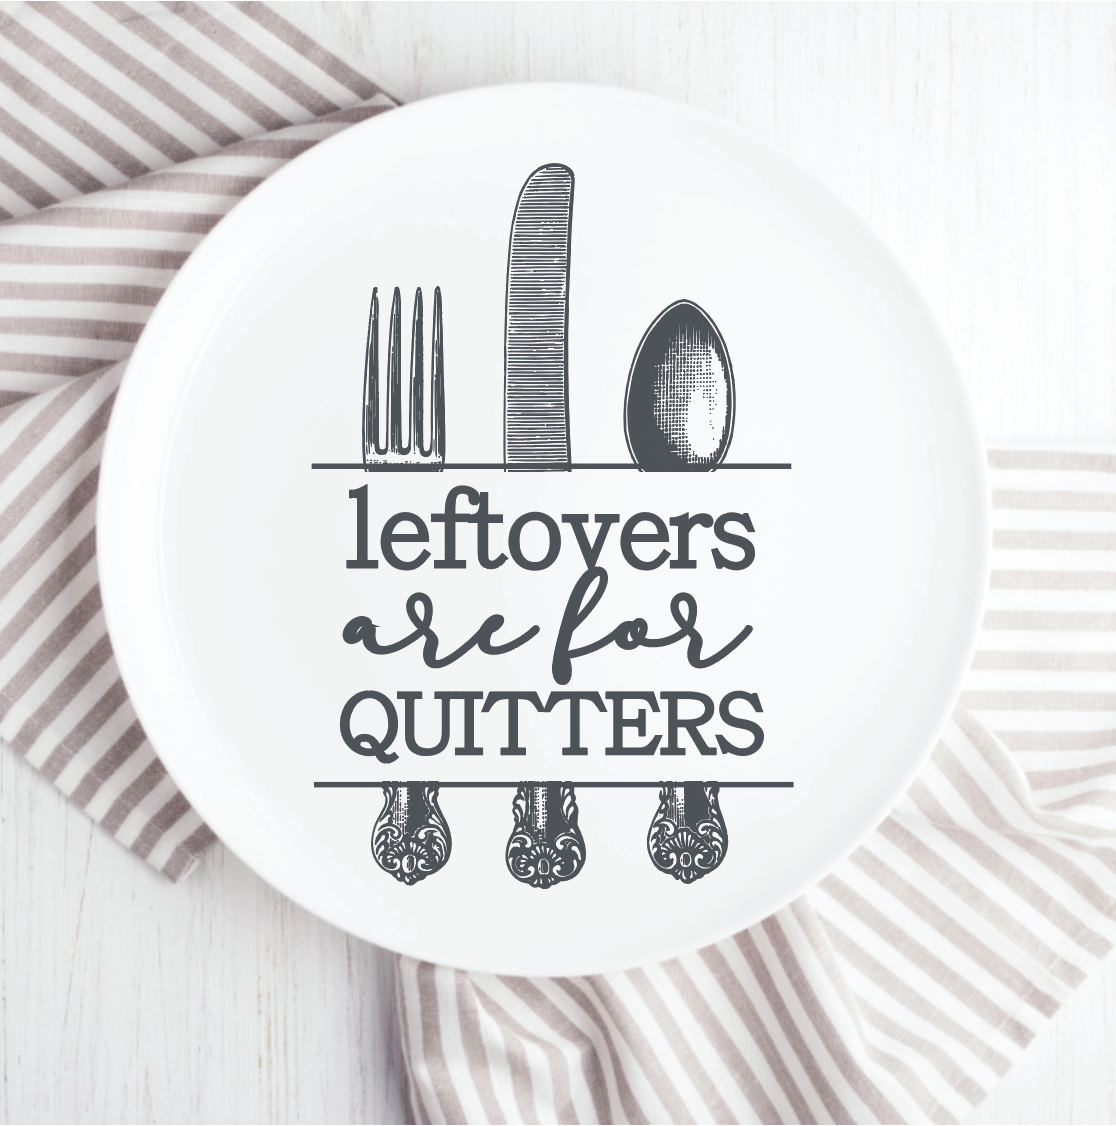 Leftovers are for Quitters - 8.5x11